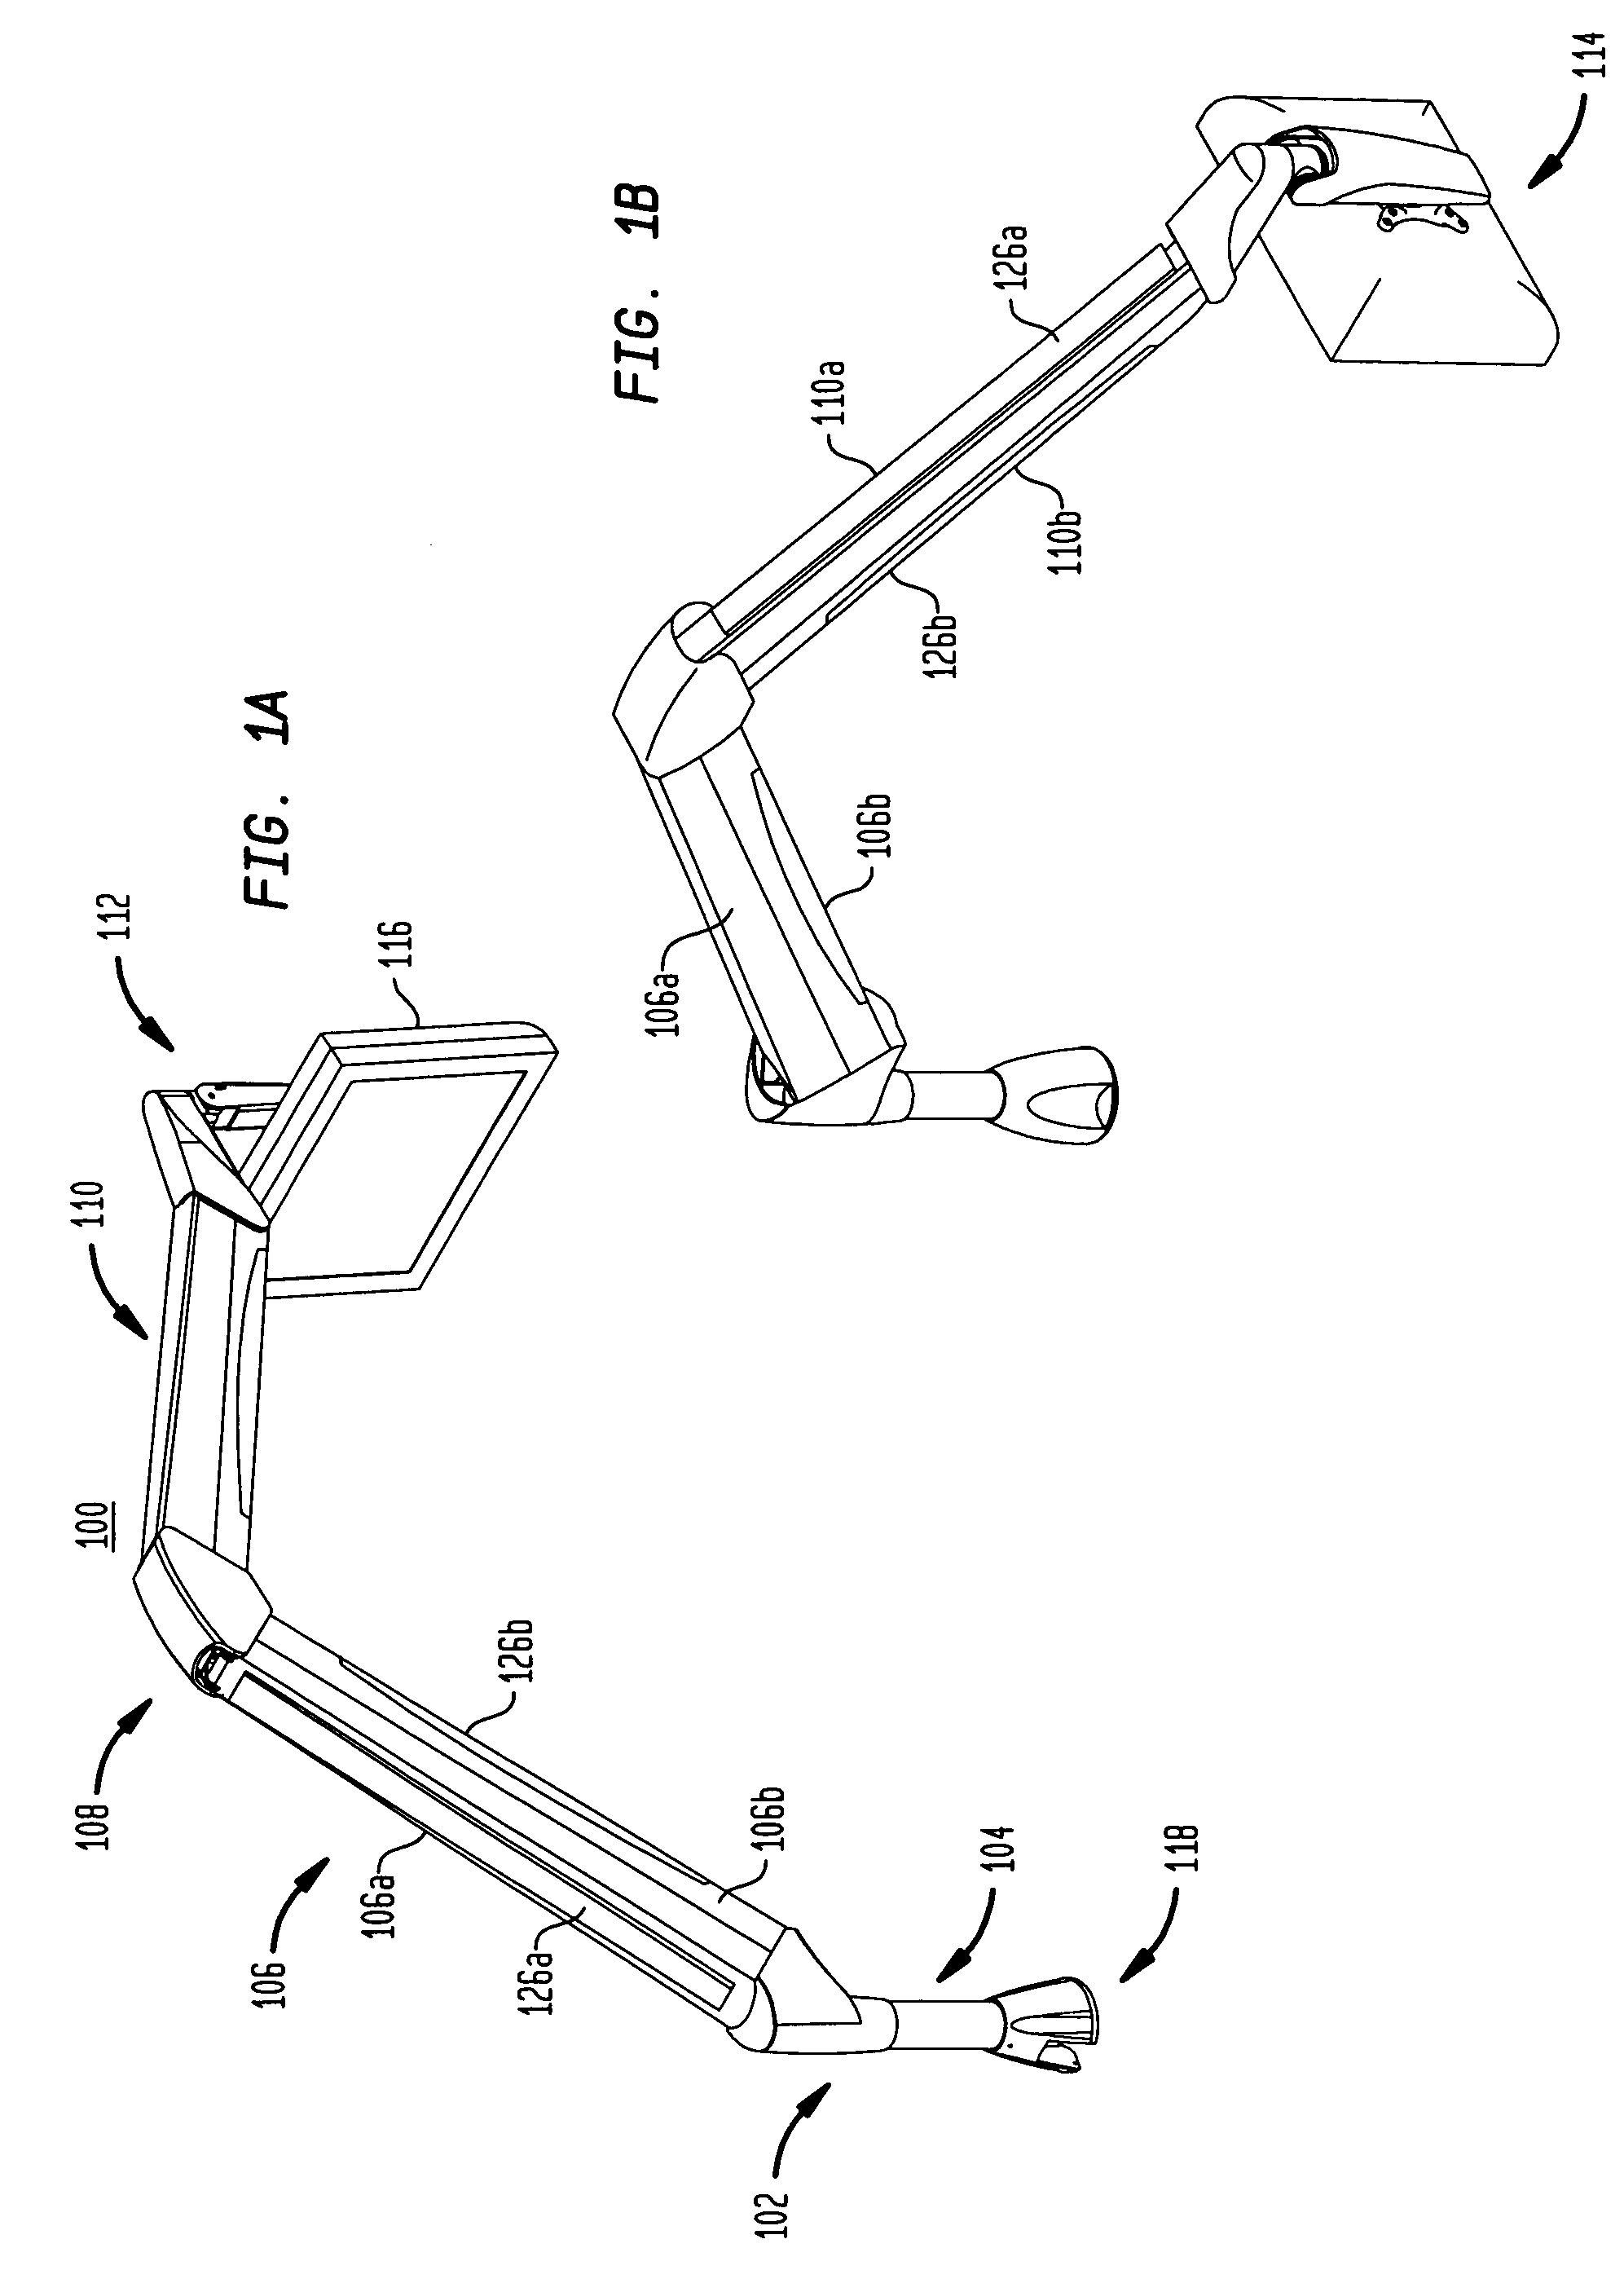 Extension arm with moving clevis